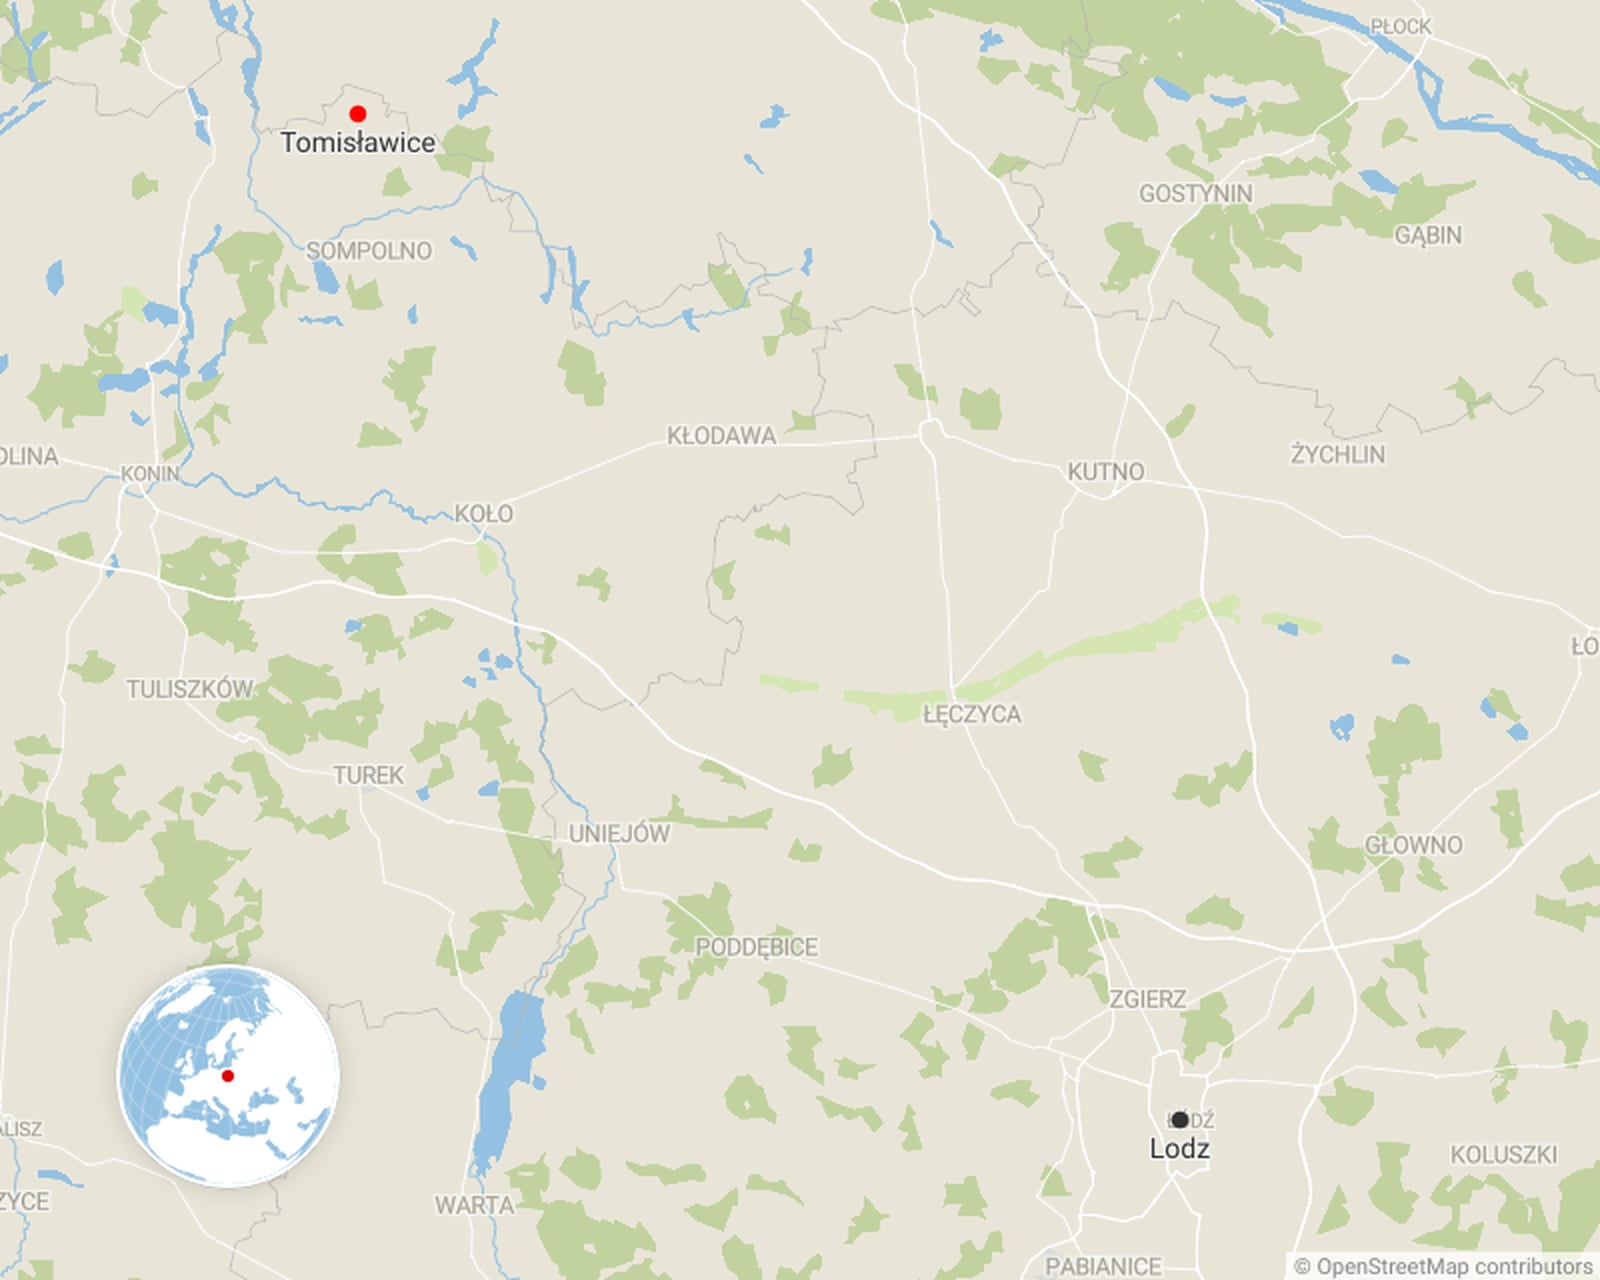 Five people were hospitalised as a result of the incident in the village of Tomislawice. Map: Datawrapper